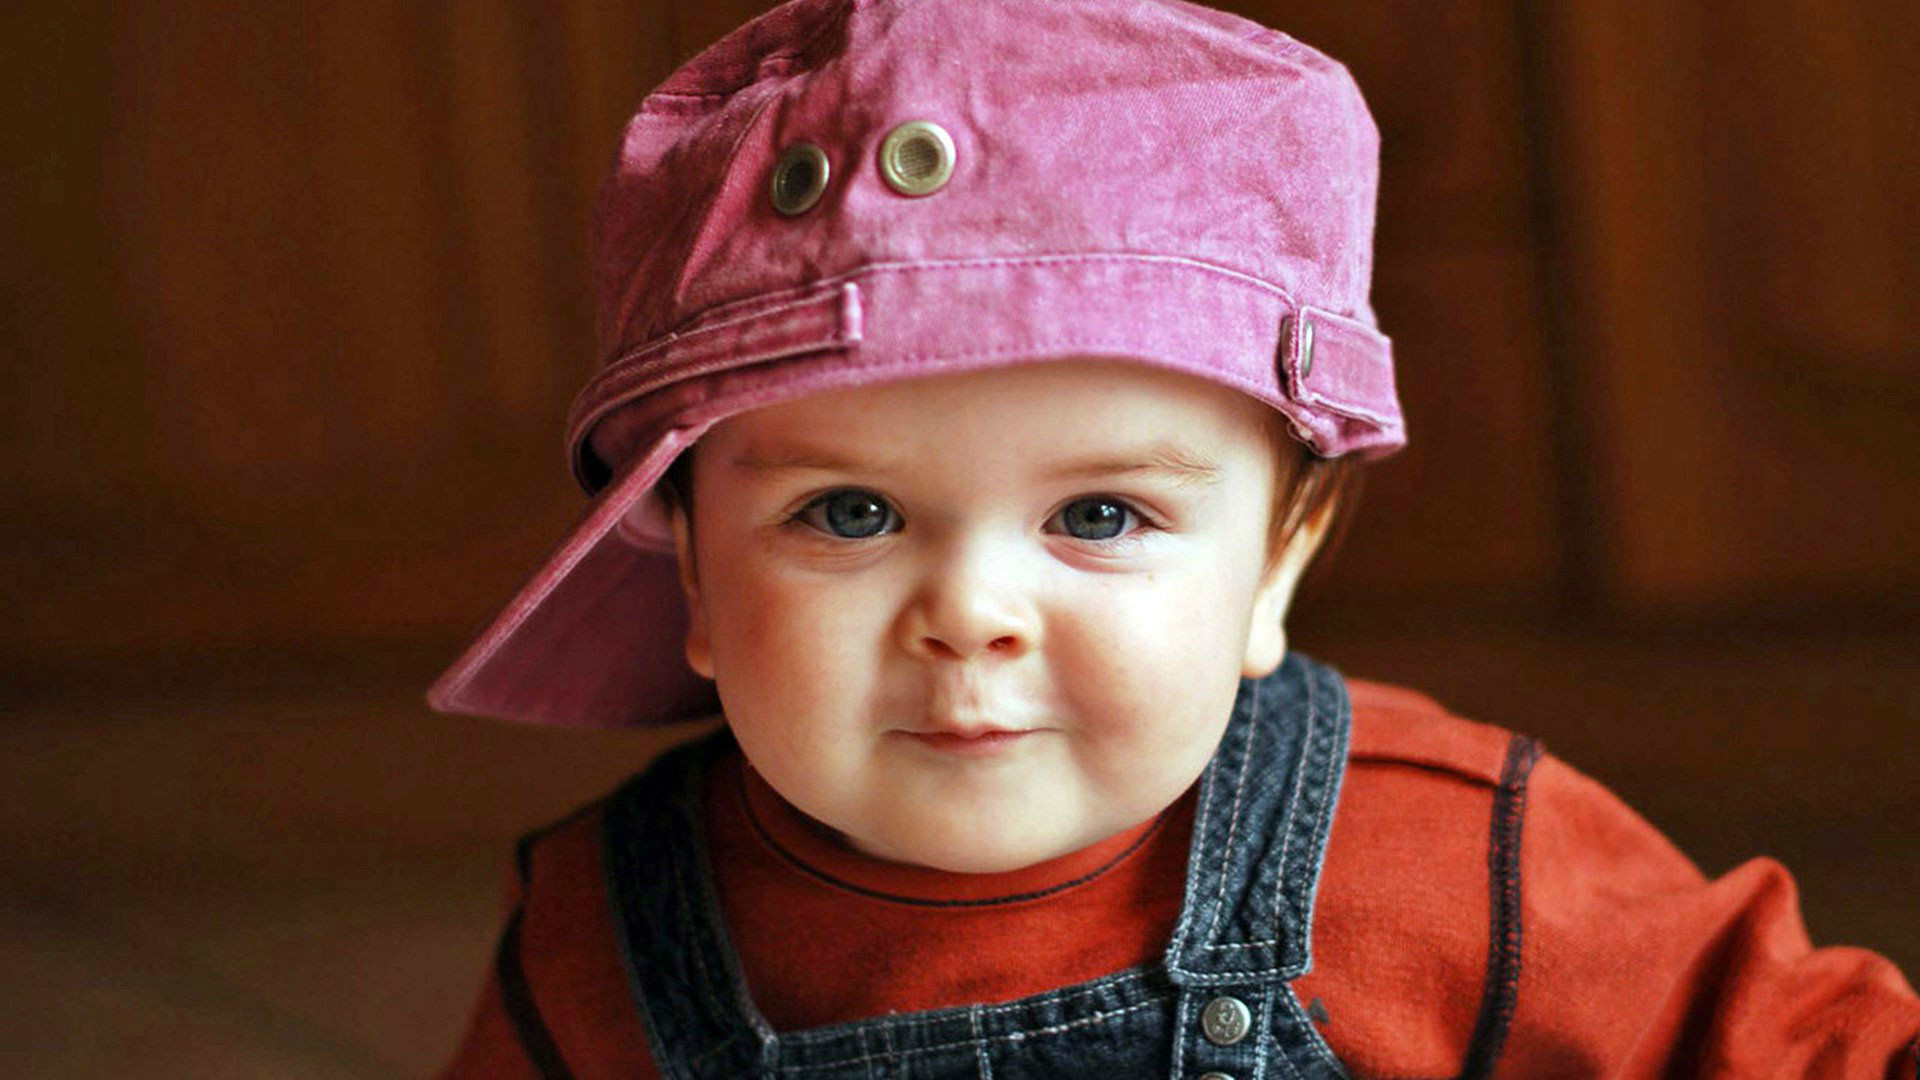 1920x1080 Cute Baby Images Hd Wallpapers Live Wallpaper Hq Pictures. online design  program. contemporary murphy ...